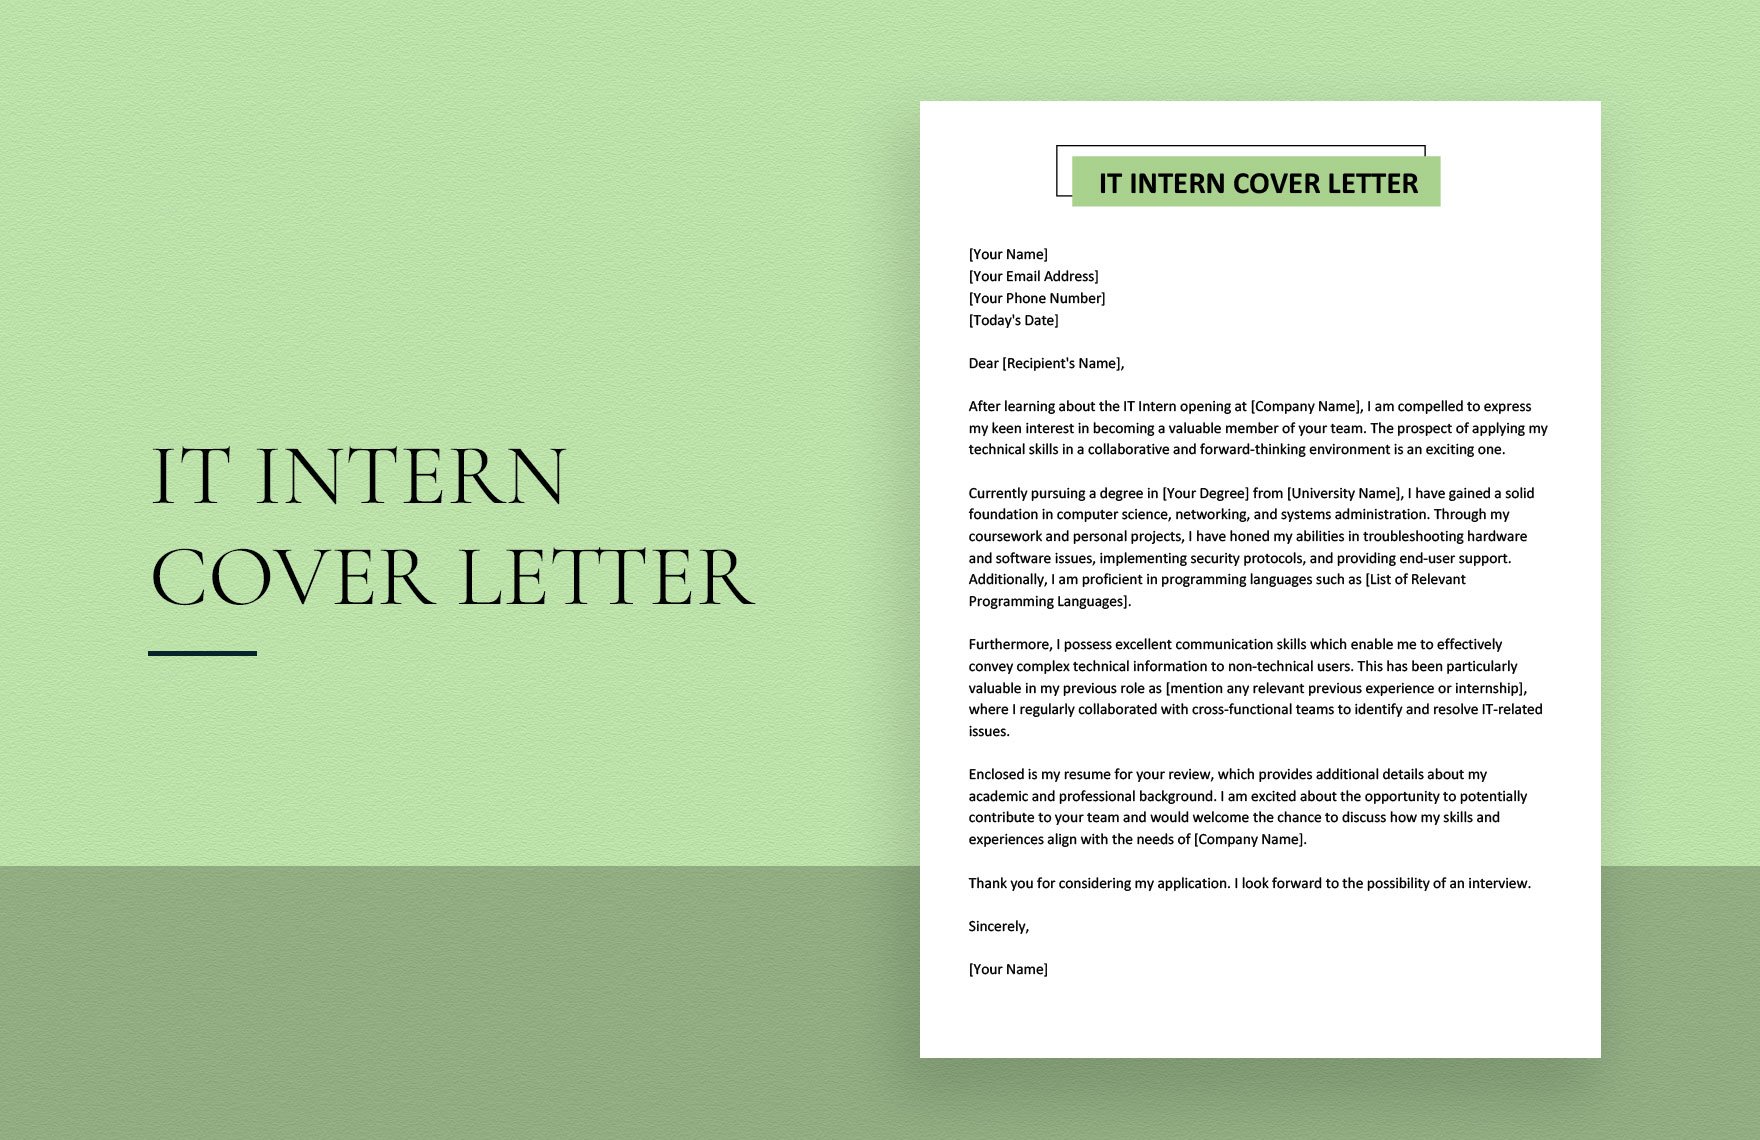 IT Intern Cover Letter